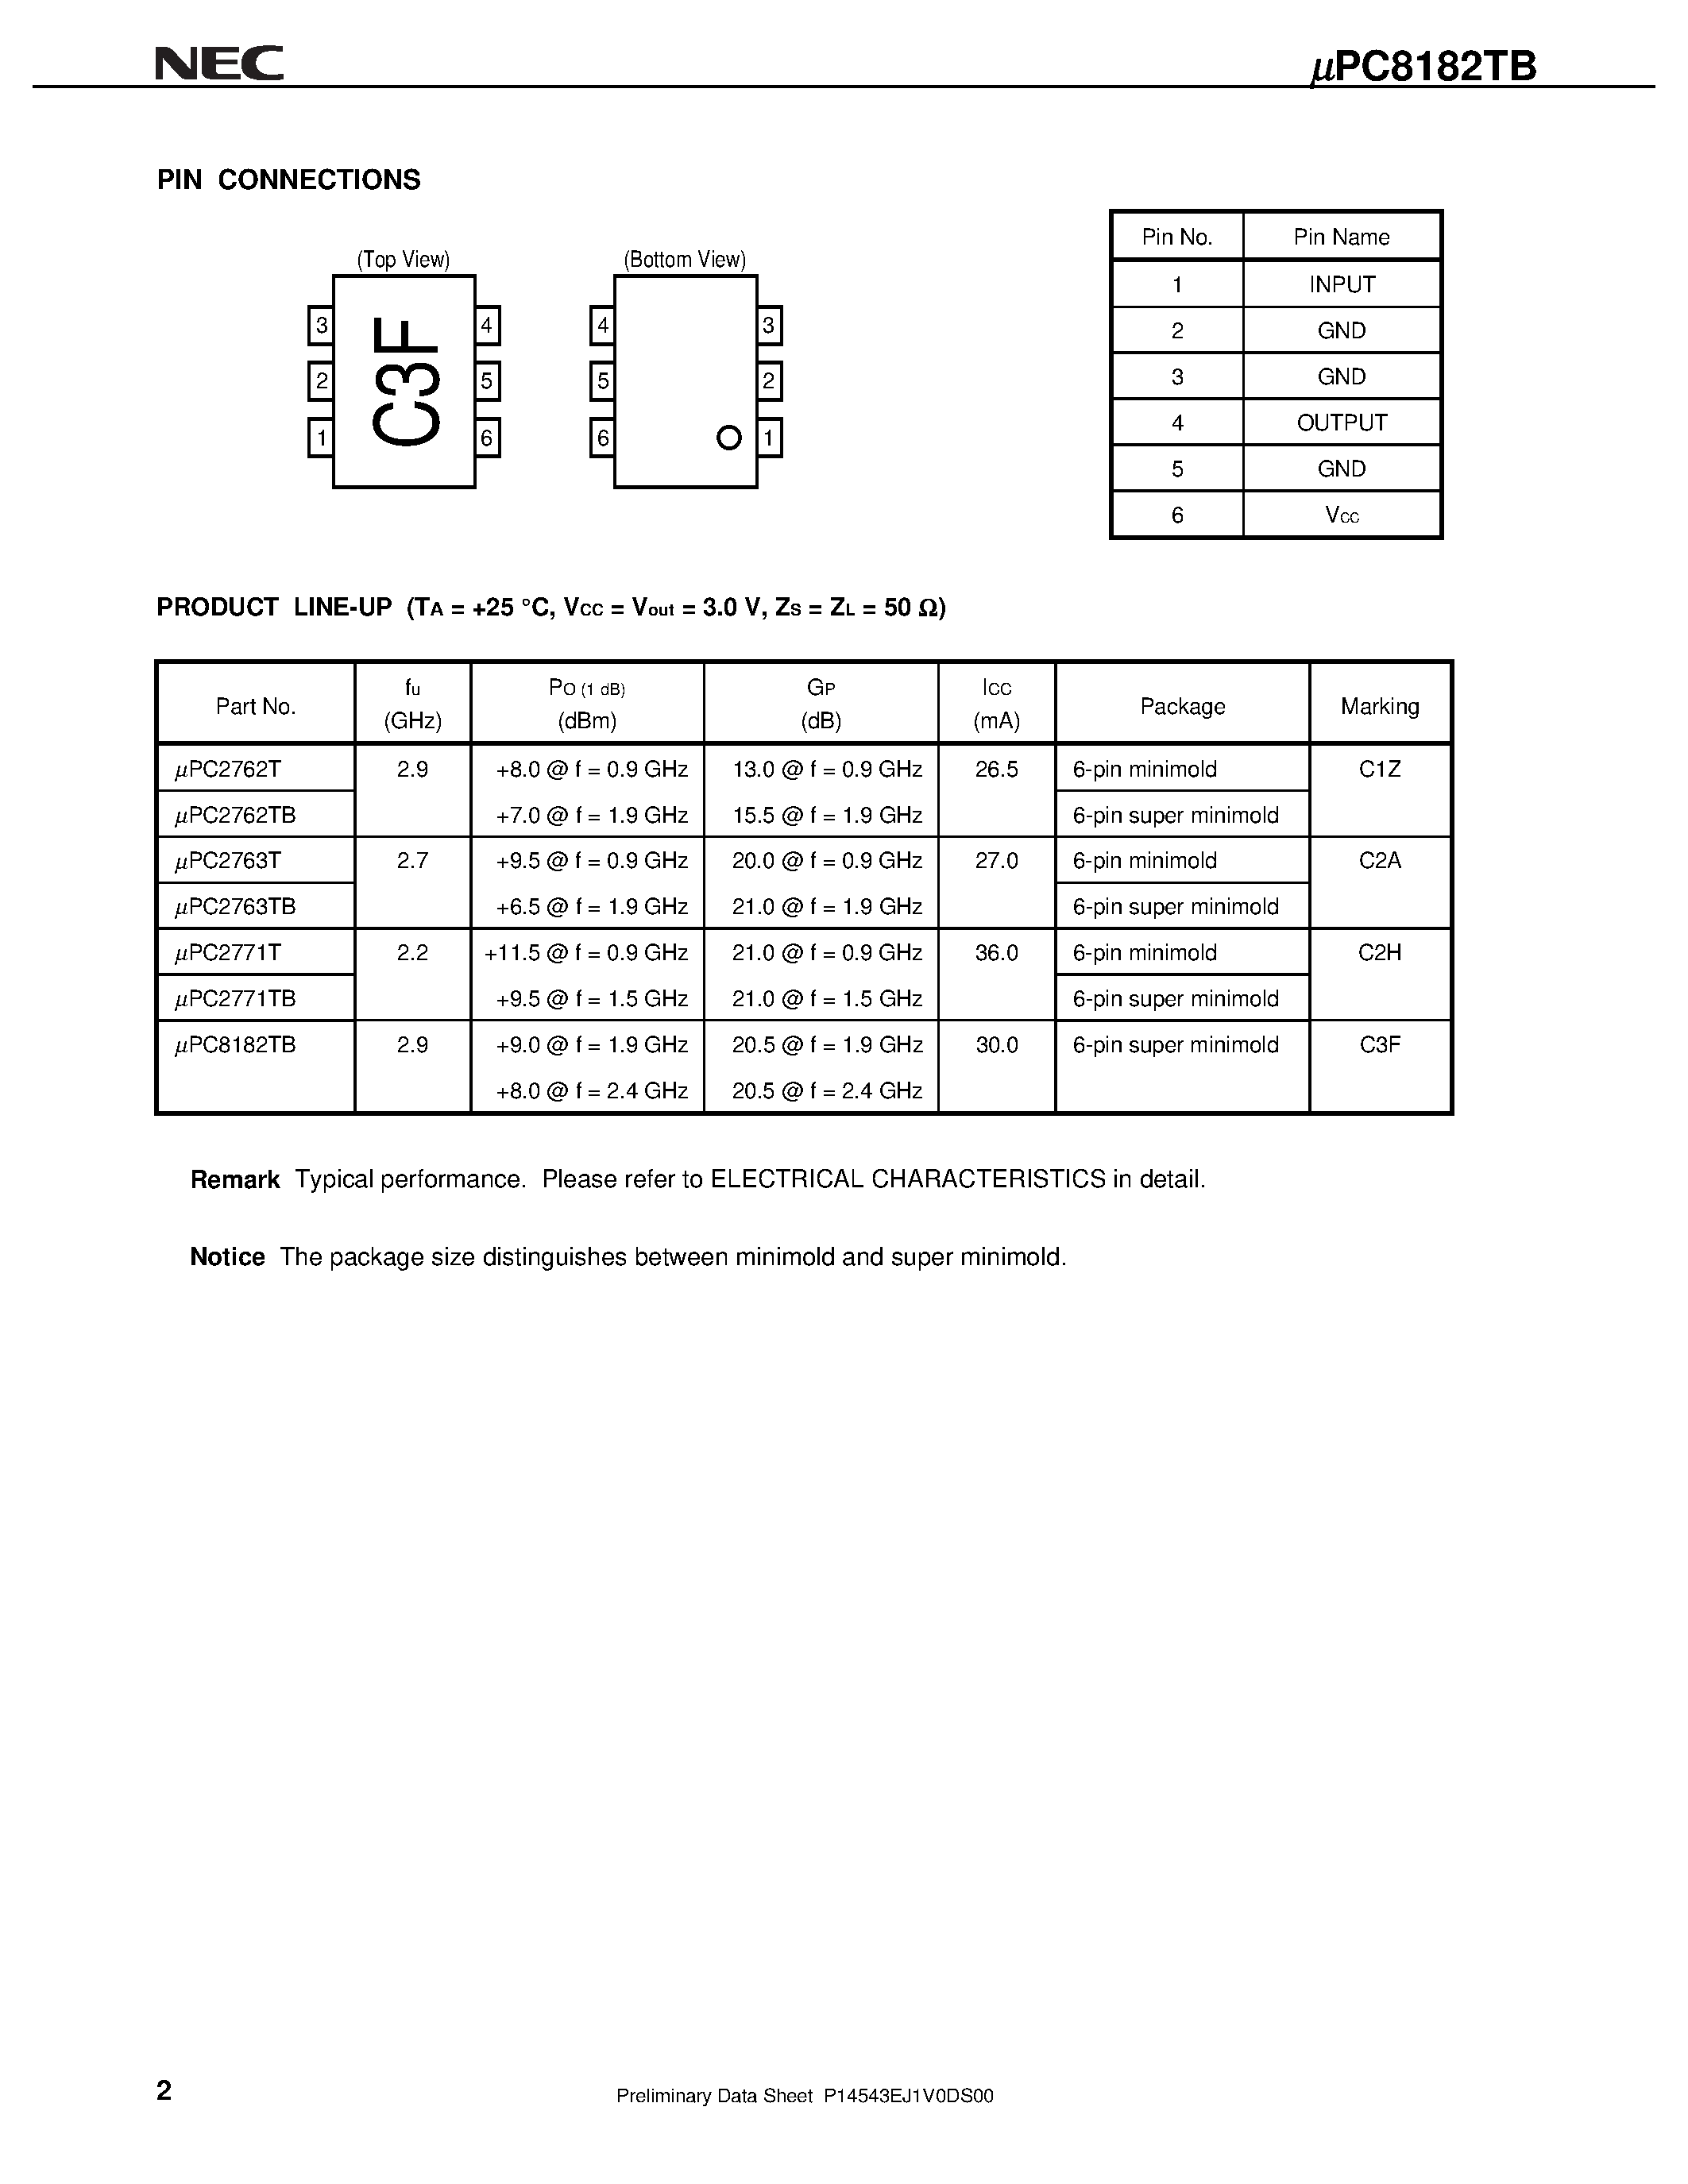 Datasheet UPC8182TB - 3 V/ 2.9 GHz SILICON MMIC MEDIUM OUTPUT POWER AMPLIFIER FOR MOBILE COMMUNICATIONS page 2